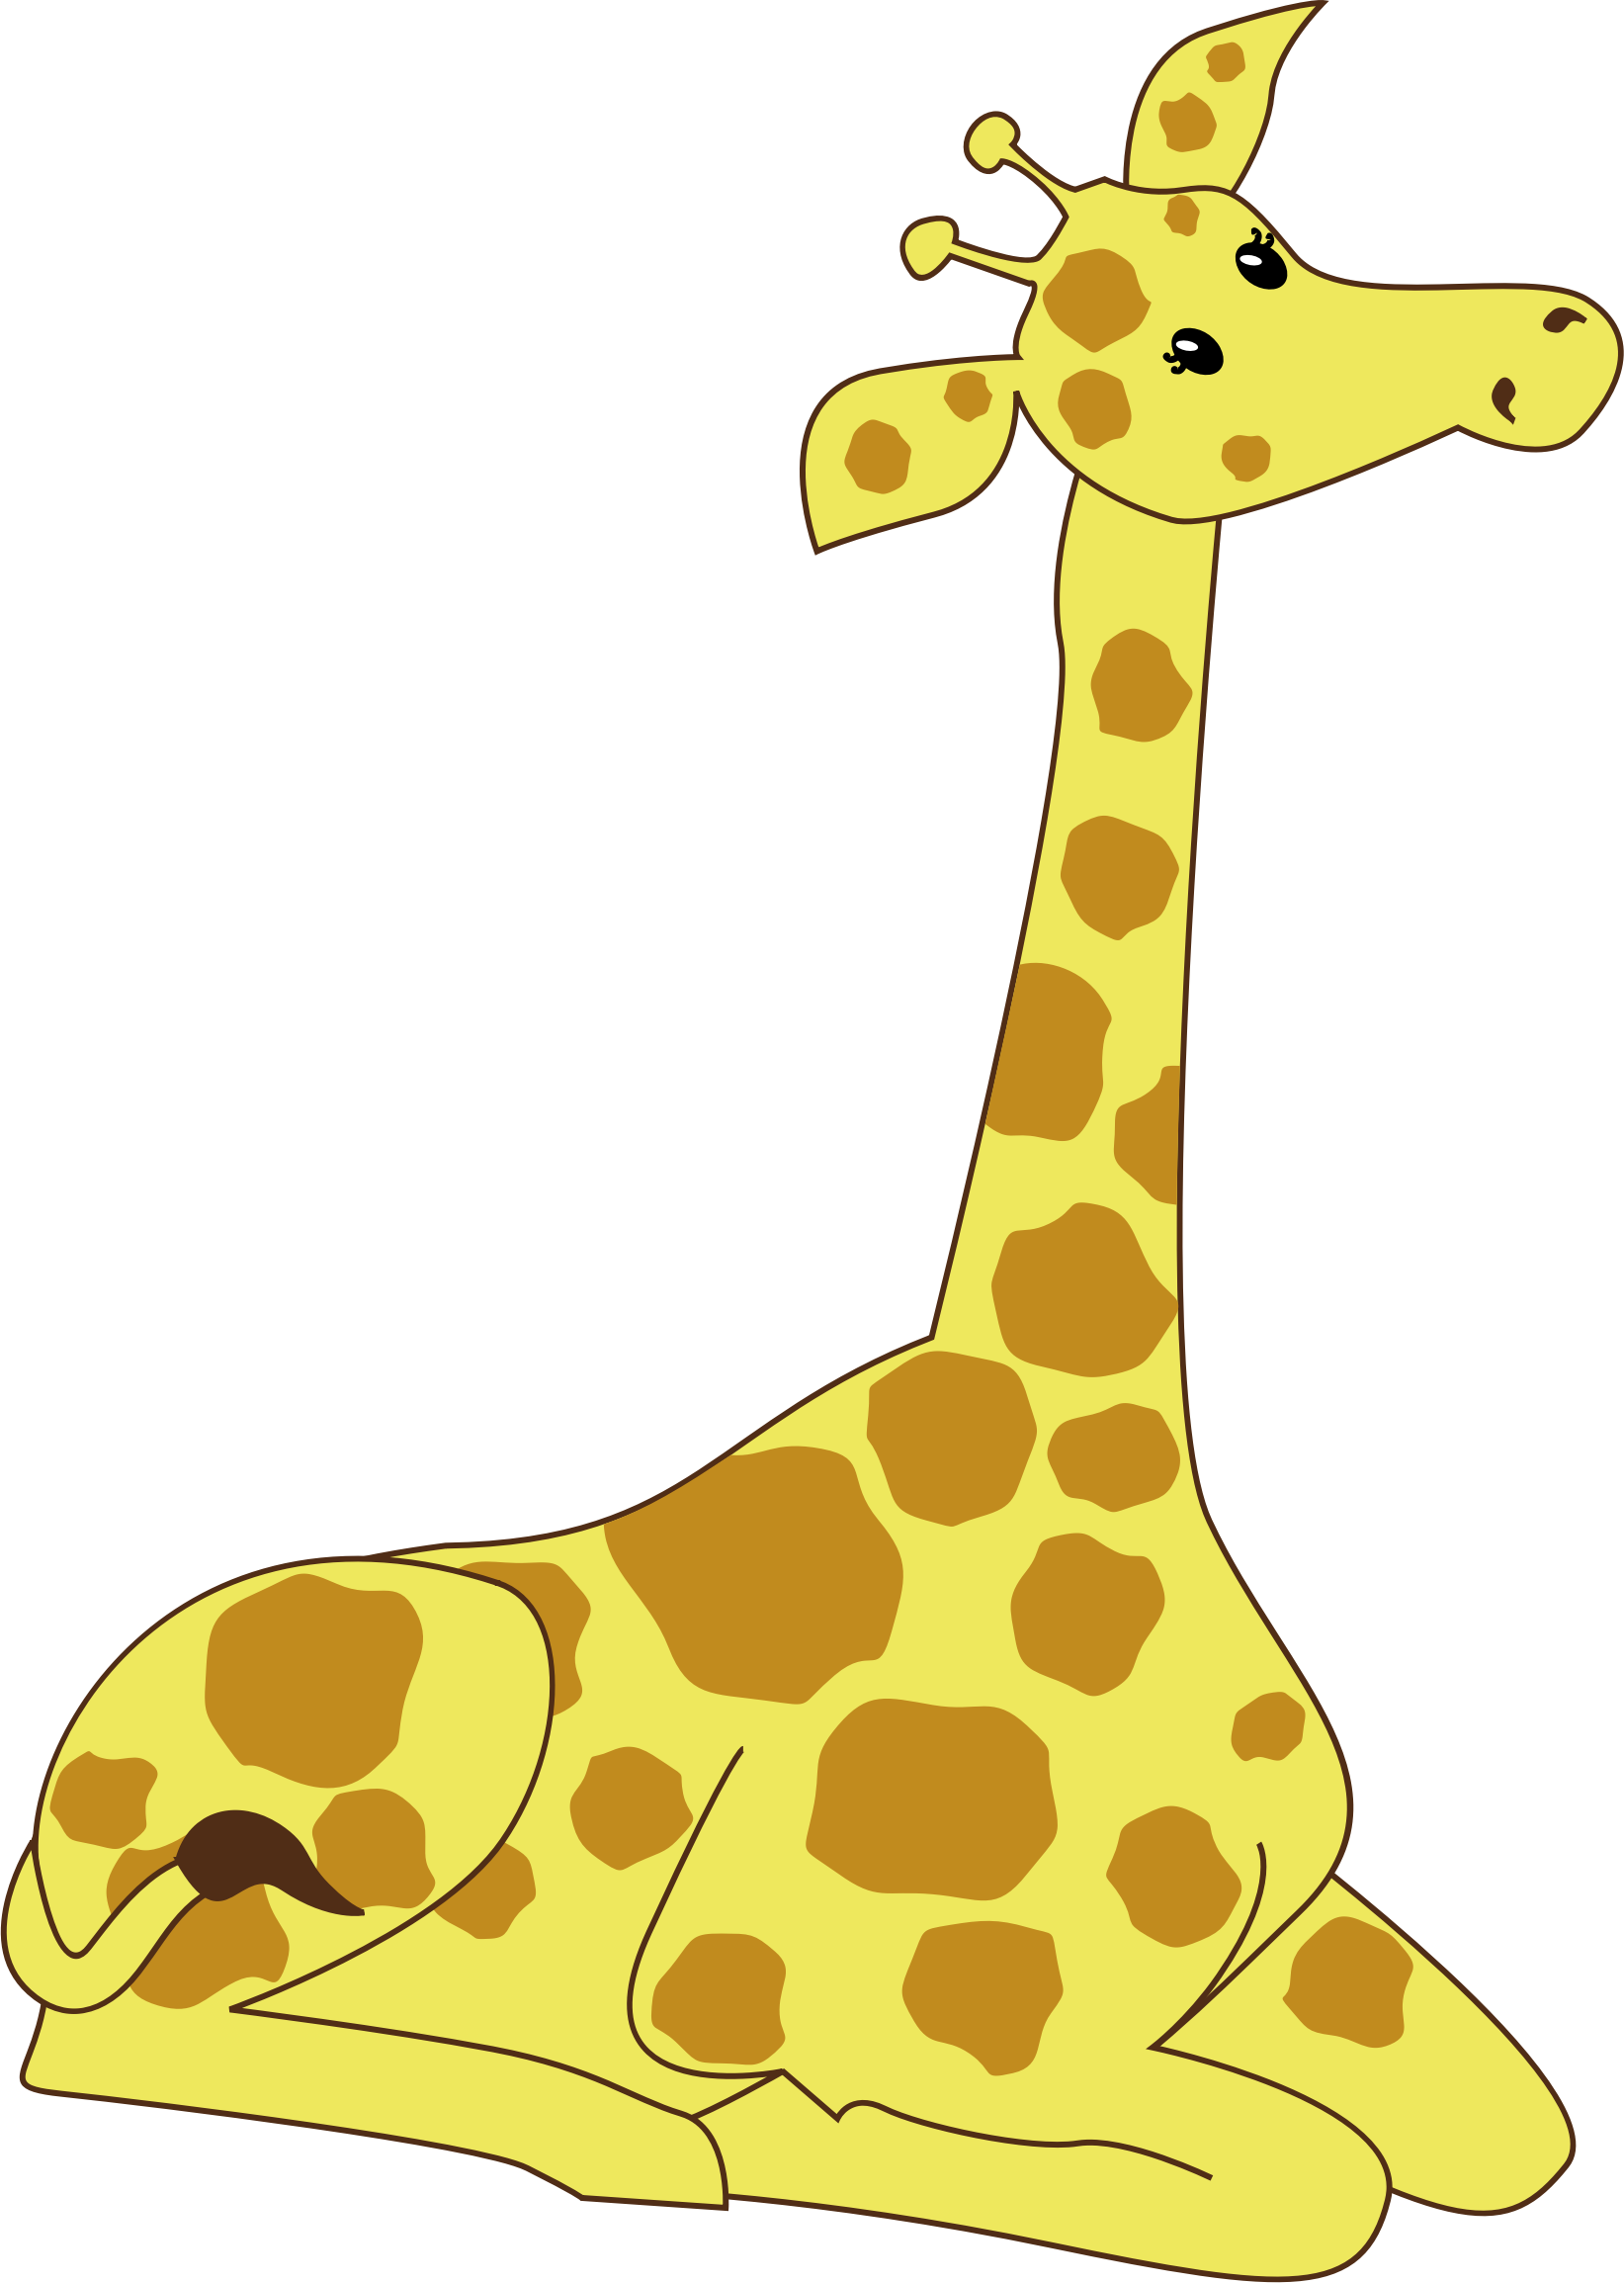 Kneeling Cartoon Giraffe Icons PNG - Free PNG and Icons Downloads